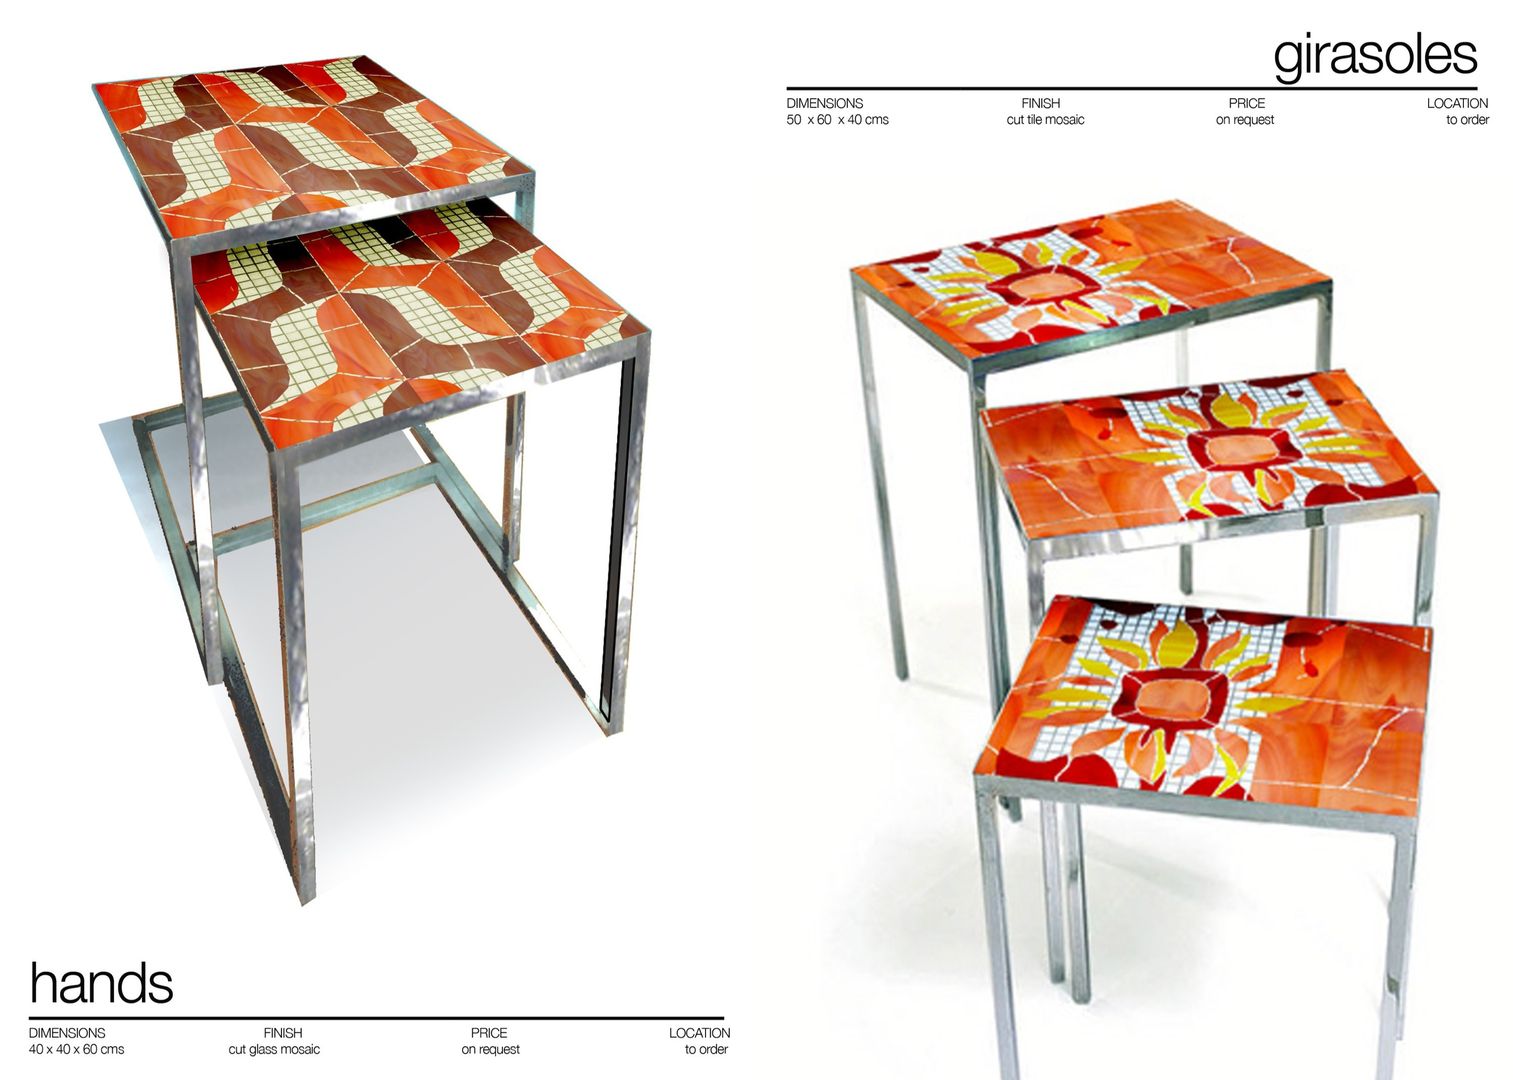 NEST AND SIDE TABLES, Martin Brown Mosaics Martin Brown Mosaics Ruang Makan Modern Tables